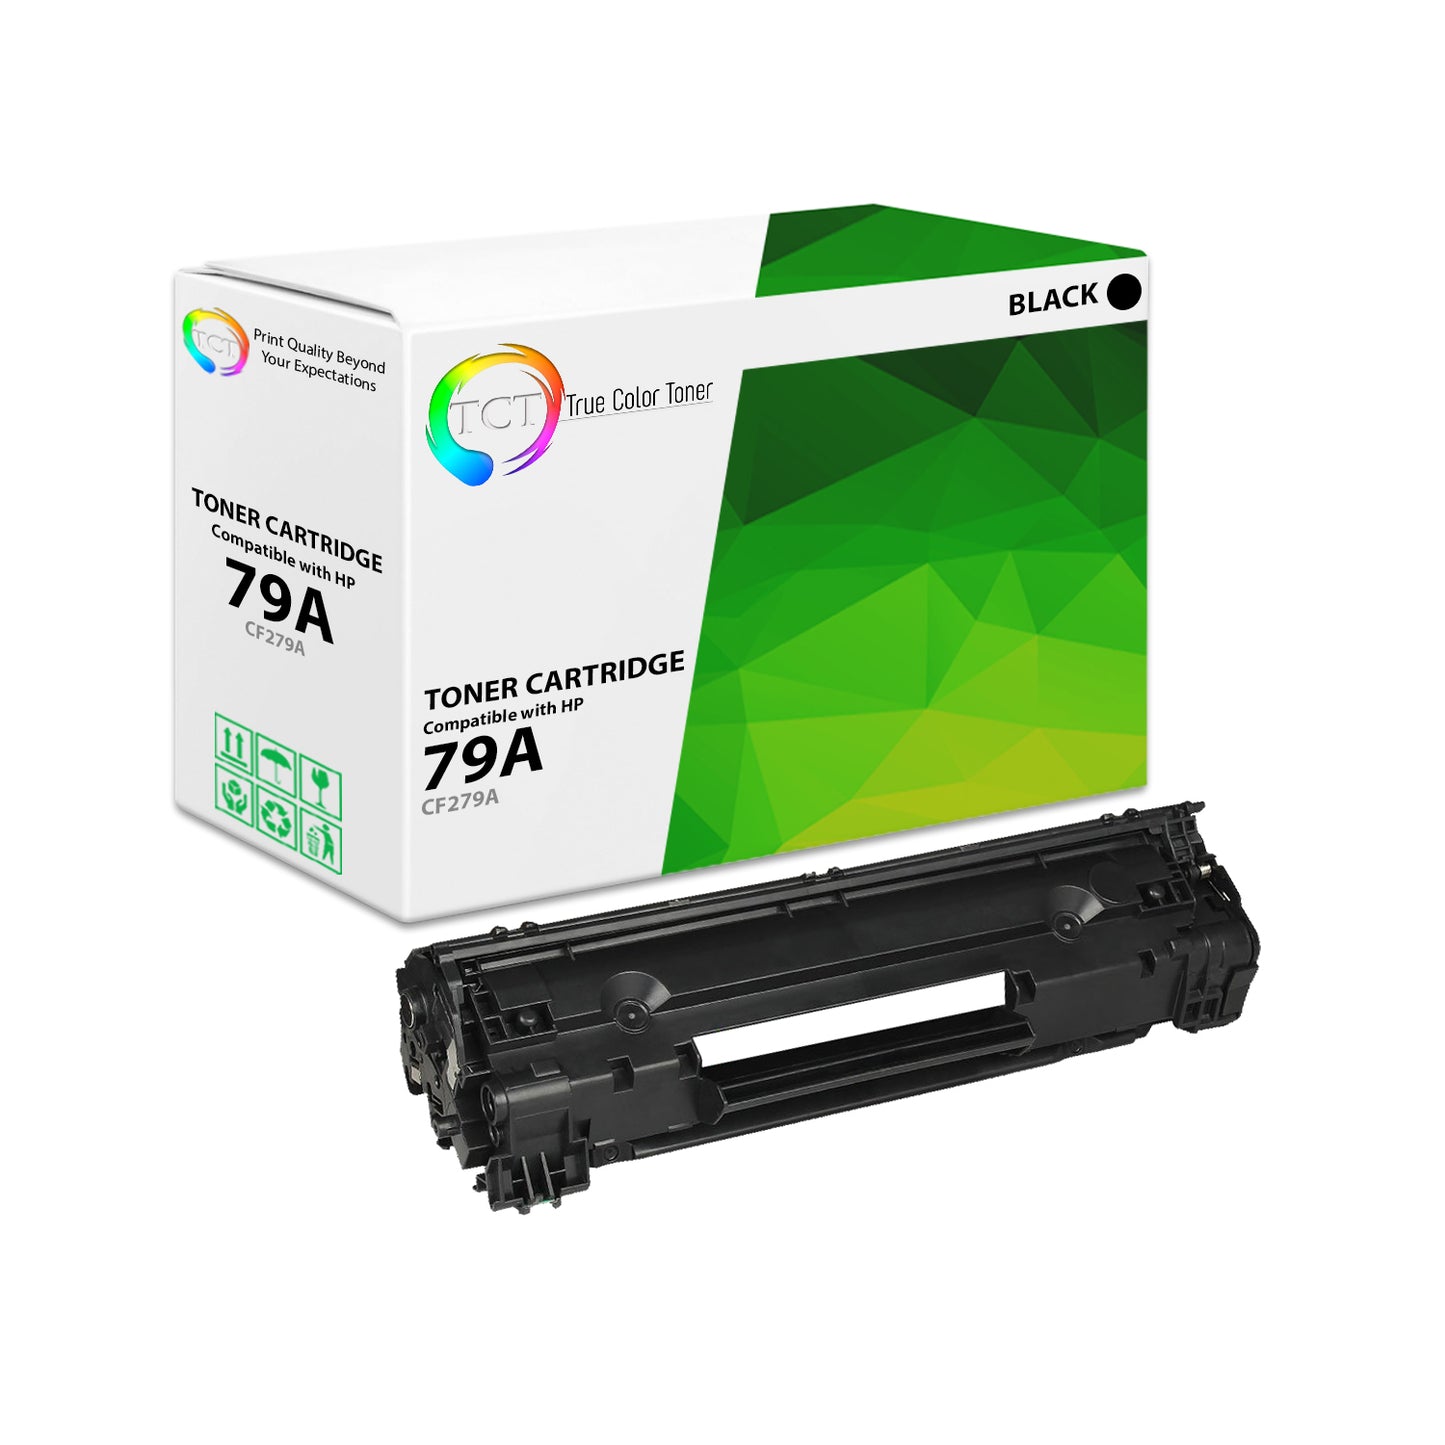 TCT Compatible Toner Cartridge Replacement for the HP 79A Series - 1 Pack Black